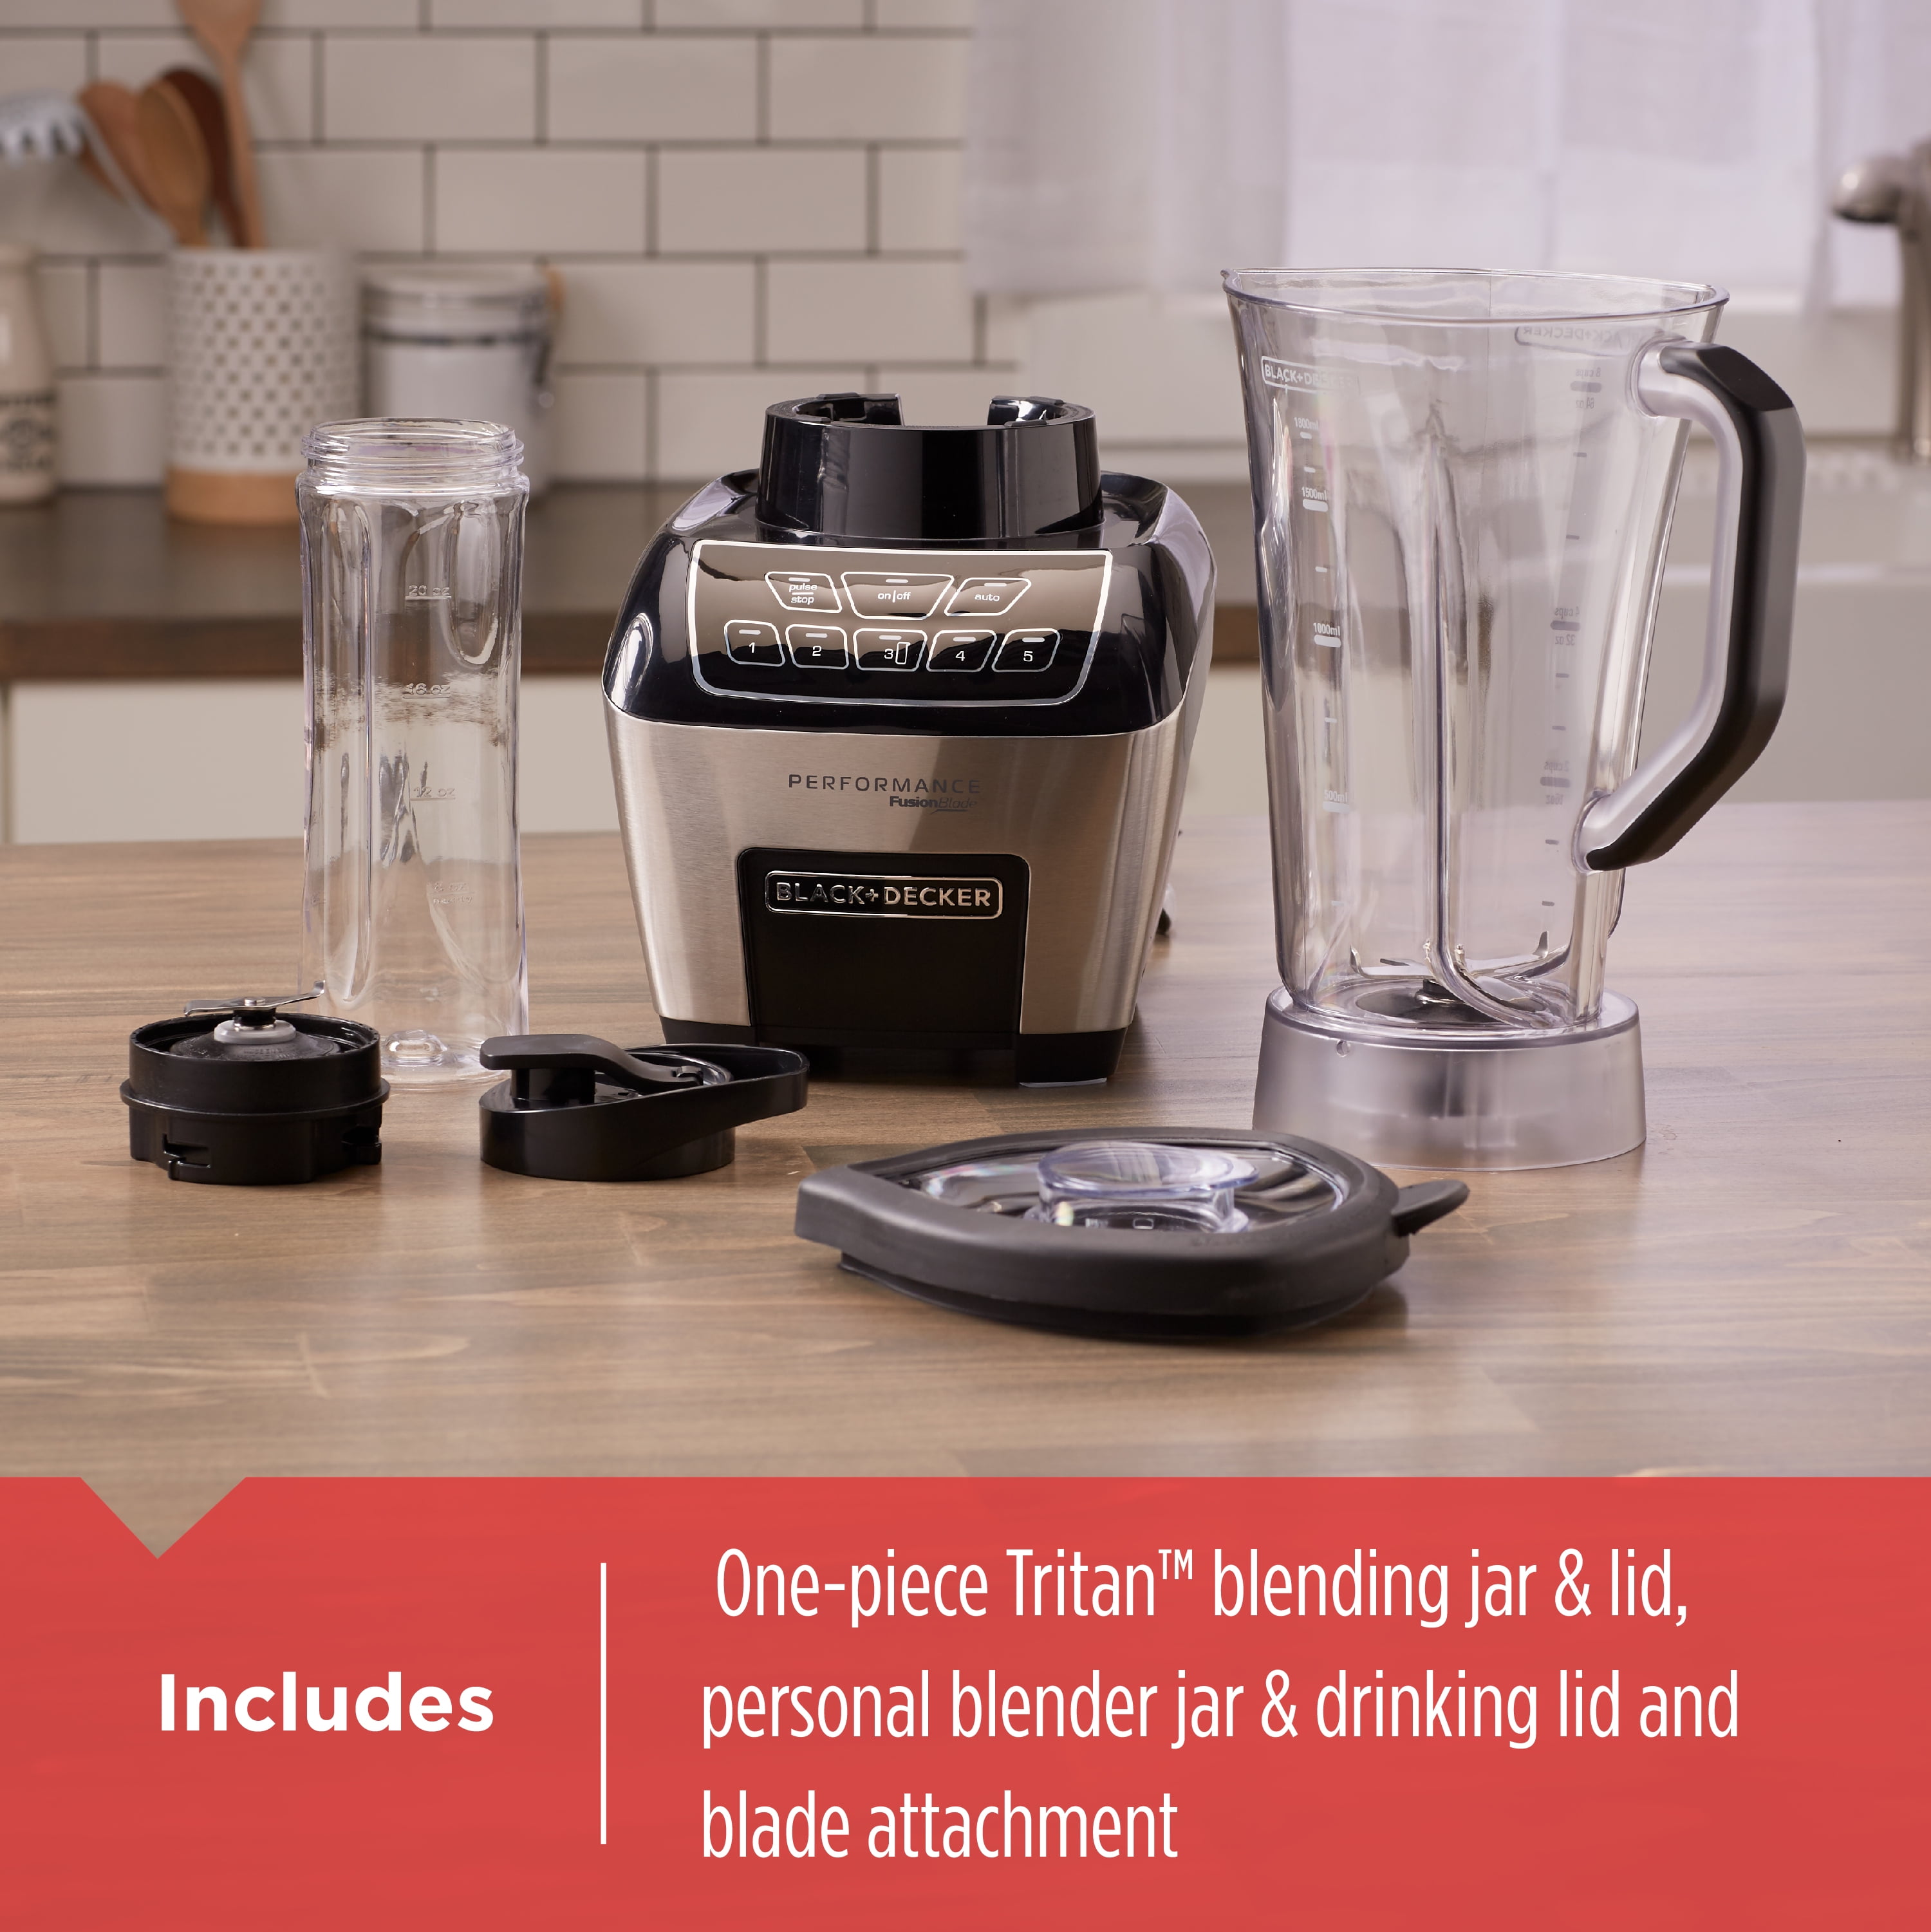 Blender Challenge: Does the Black & Decker Performance FusionBlade Blender  Blend Work as Well as a $500 Professional One? (video) - Tech Savvy Mama